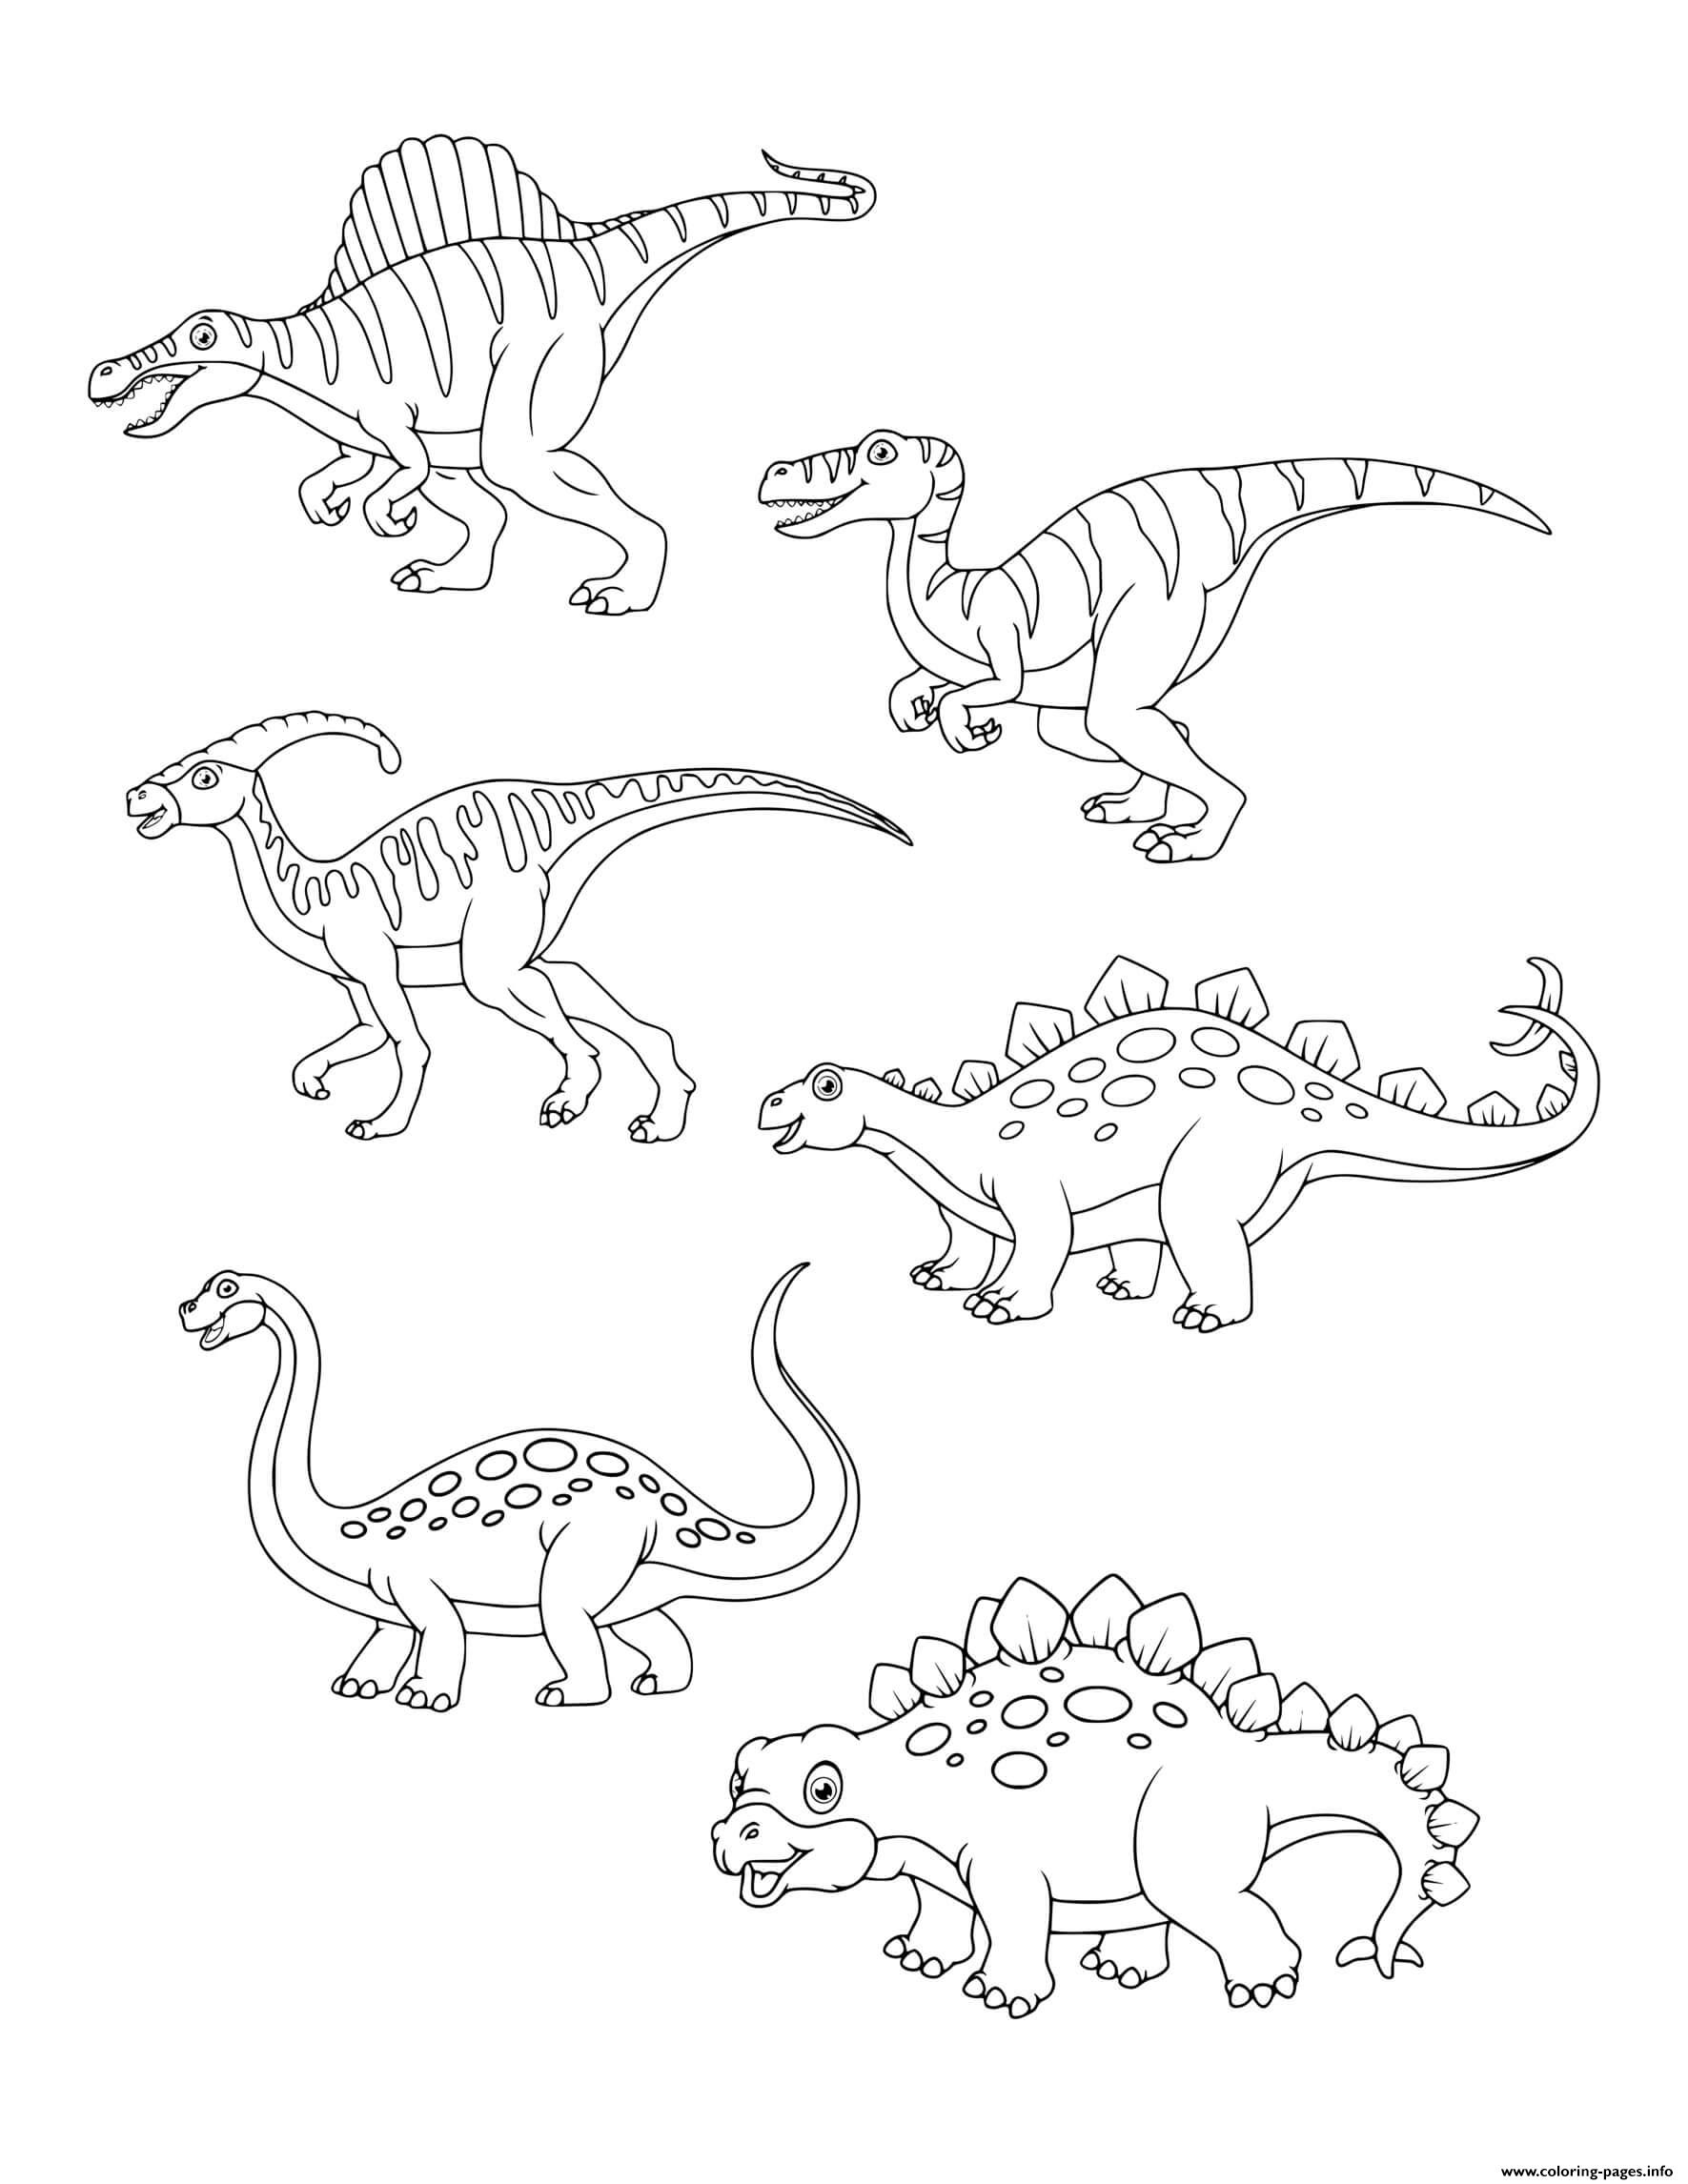 Dinosaur 6 Dinosaurs To Color coloring